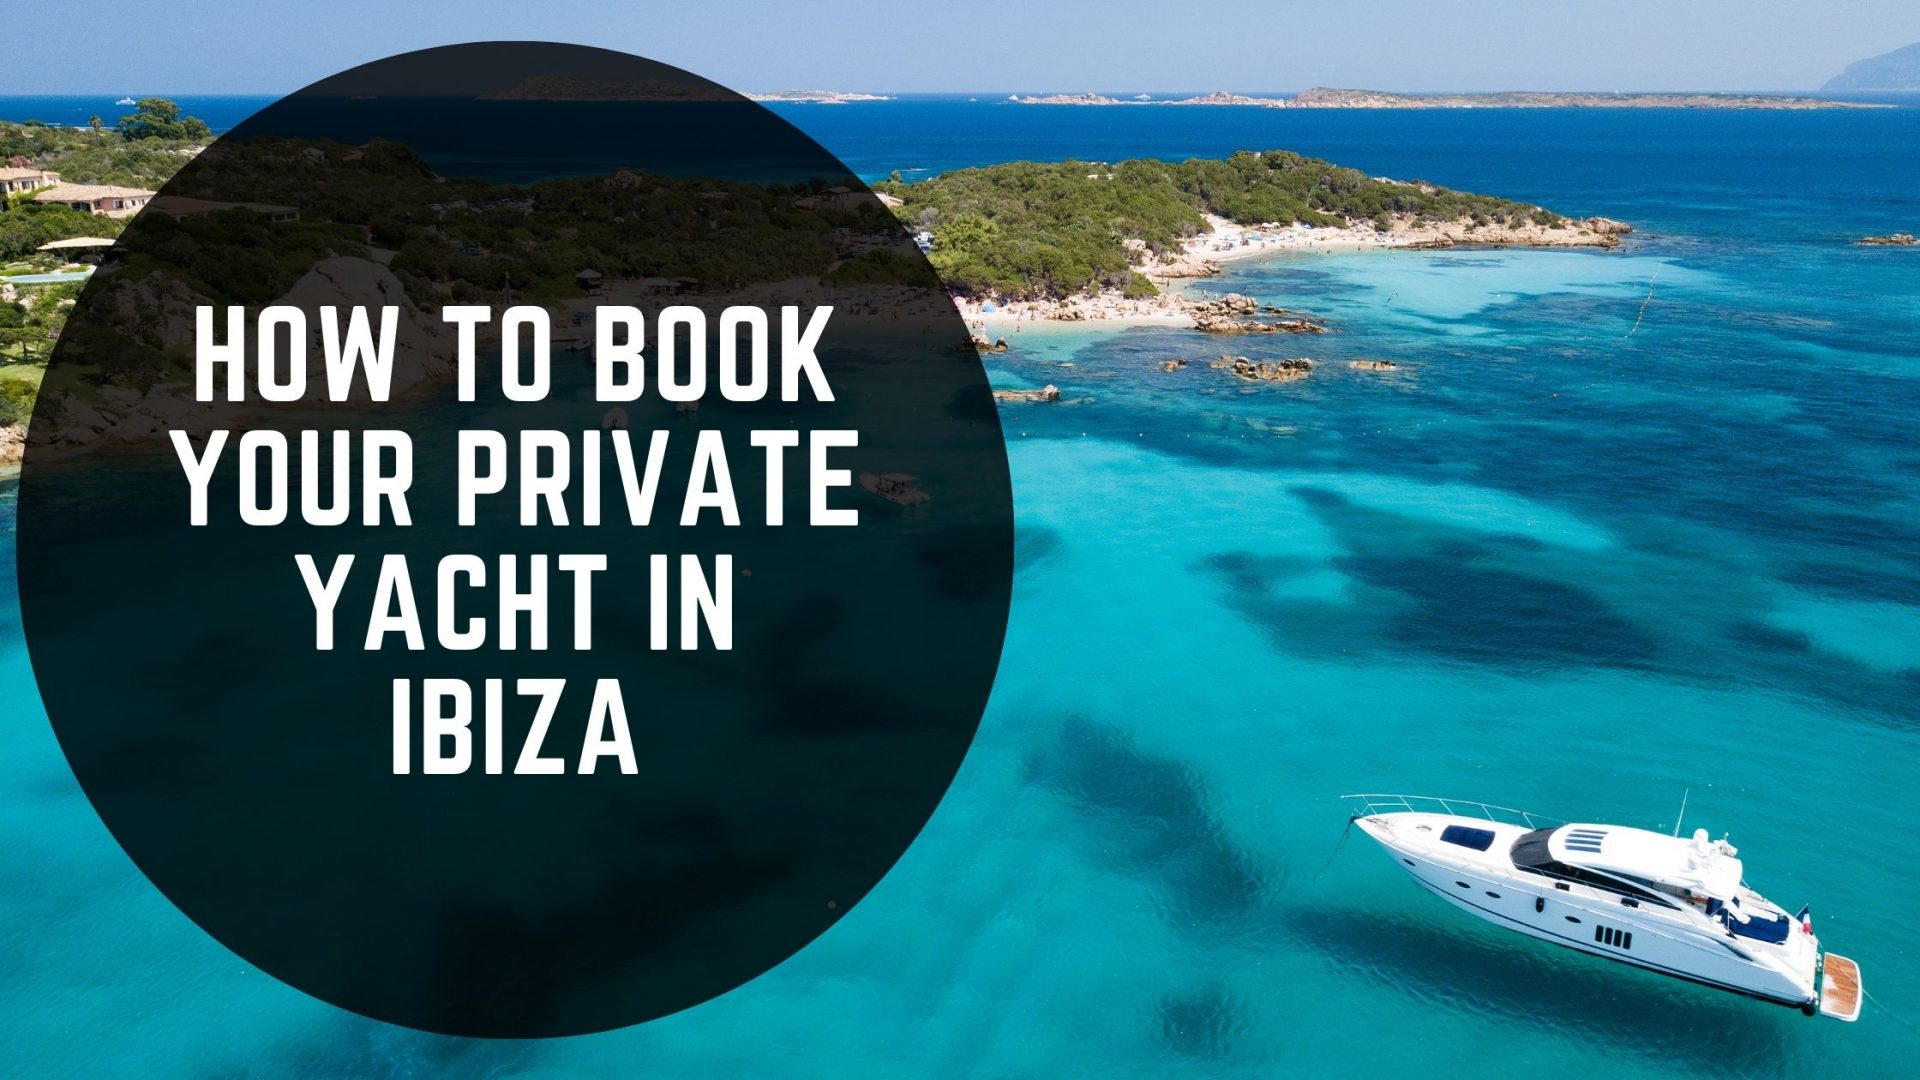 How To Book Your Private Yacht In Ibiza